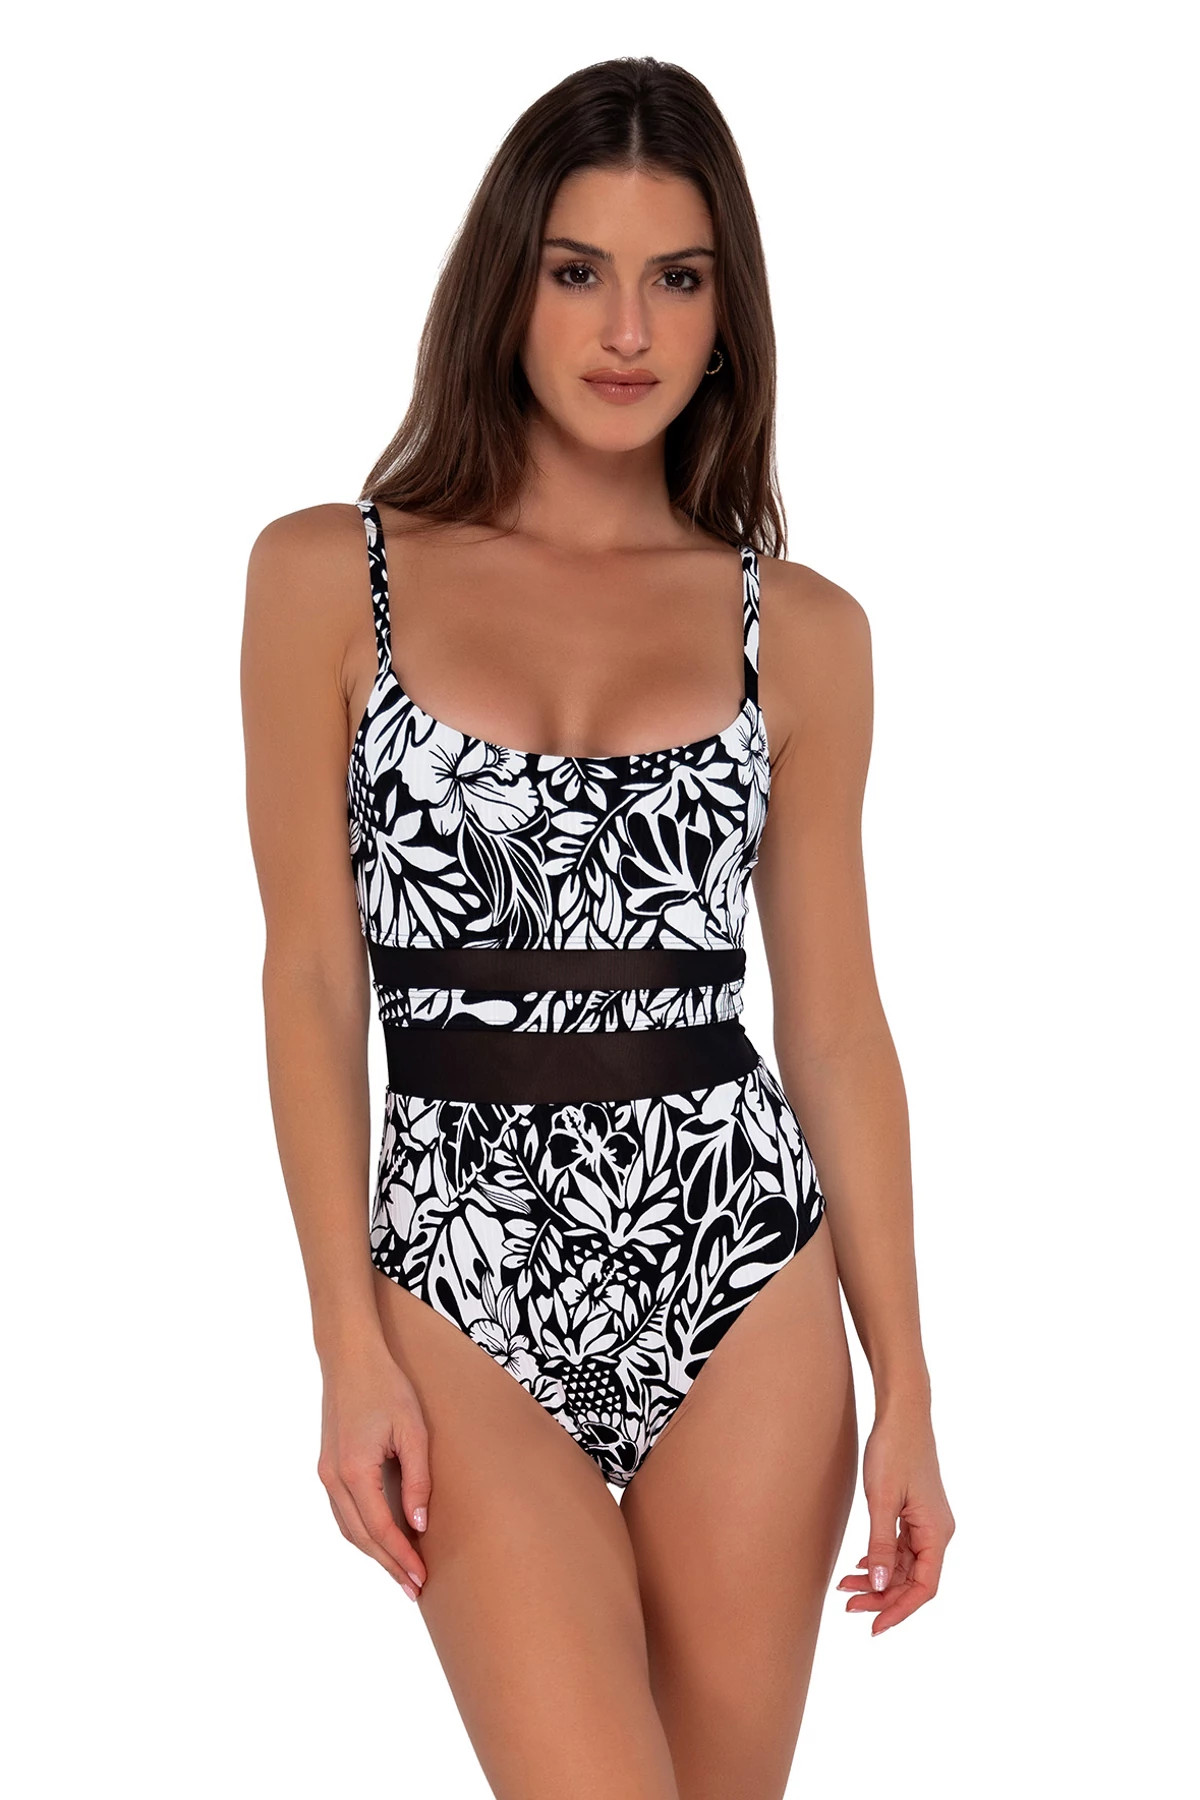 CARIBBEAN SEAGRASS TEXTURE Alexia Mesh One Piece Swimsuit image number 1